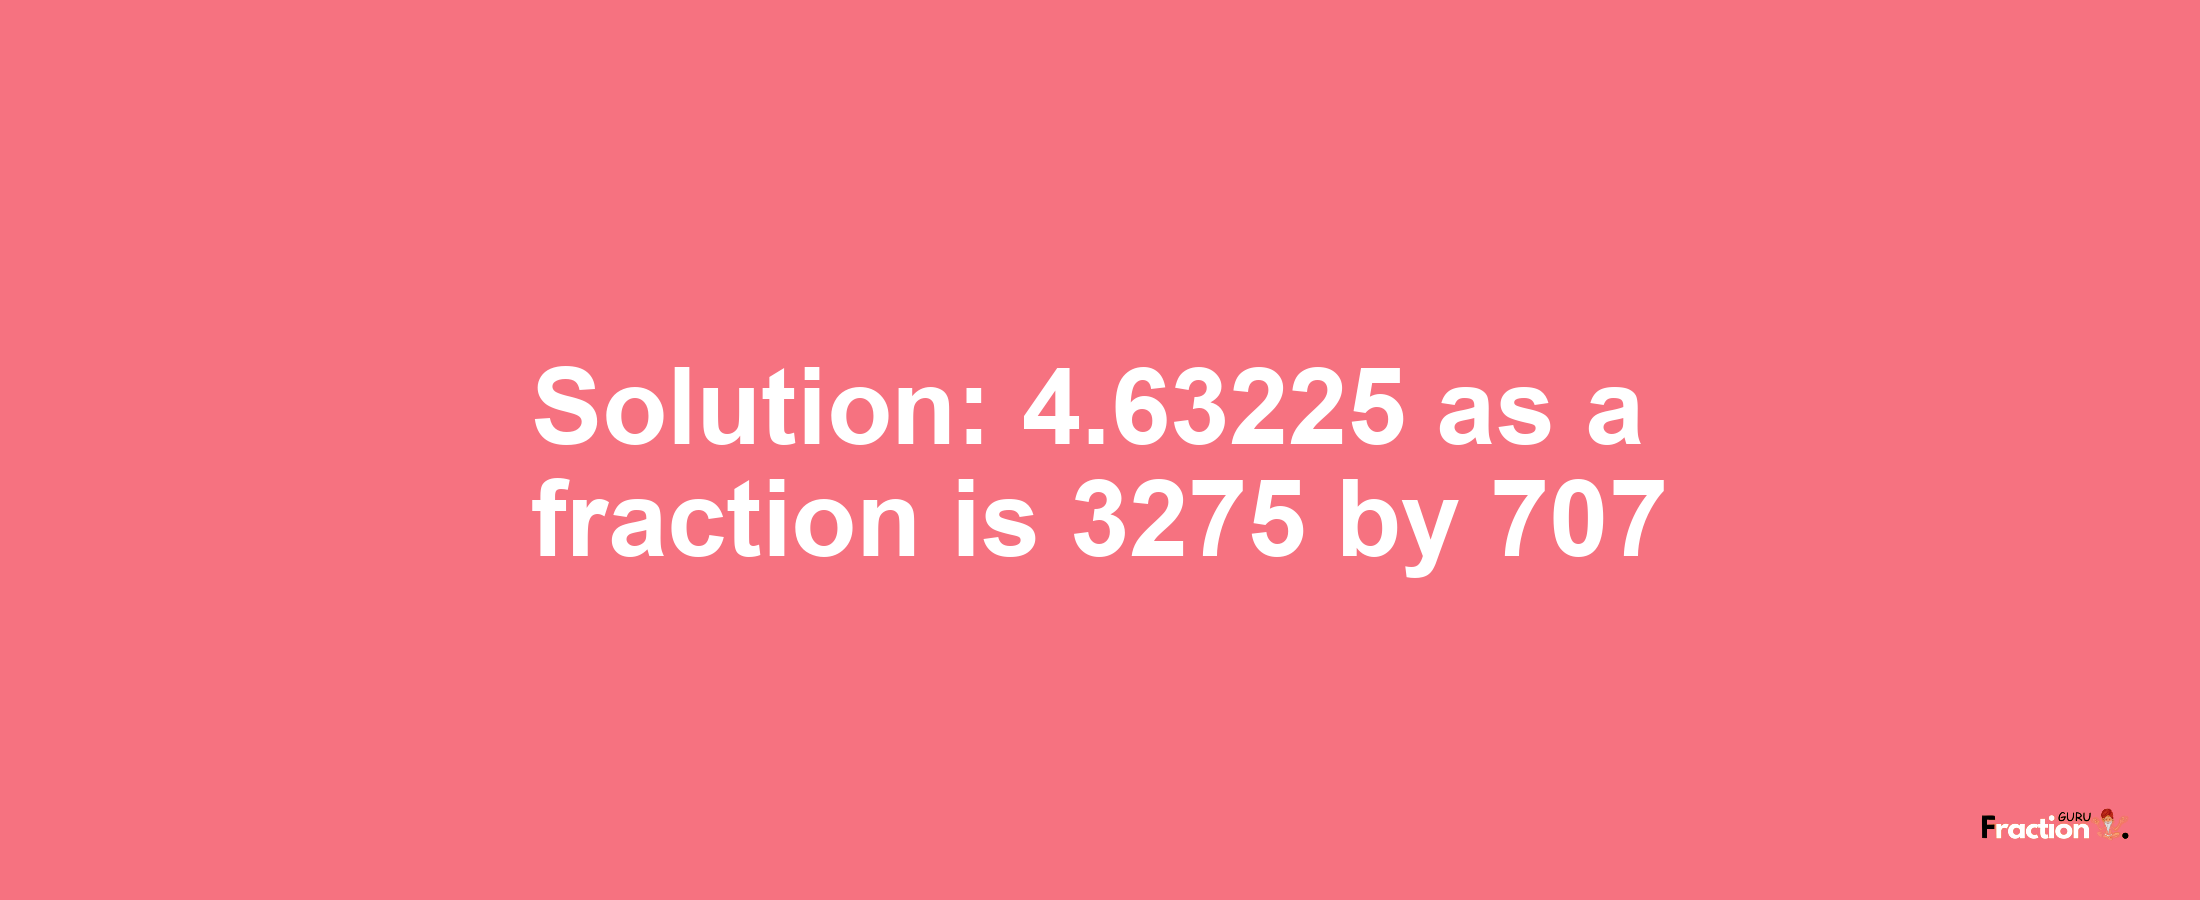 Solution:4.63225 as a fraction is 3275/707